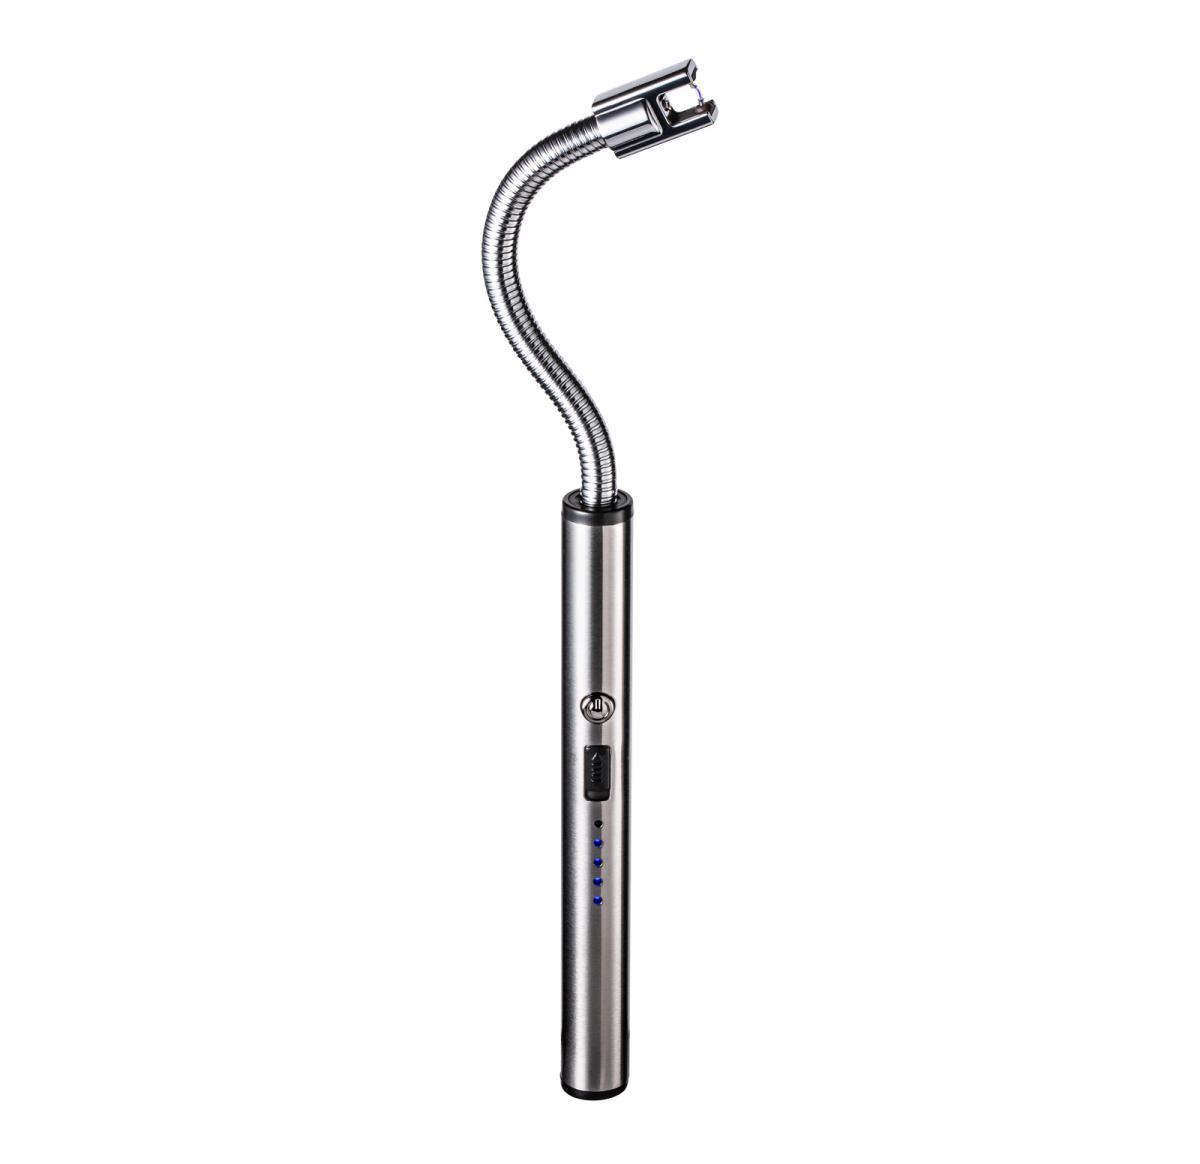 Electric arc candle lighter -MACAO SILVER